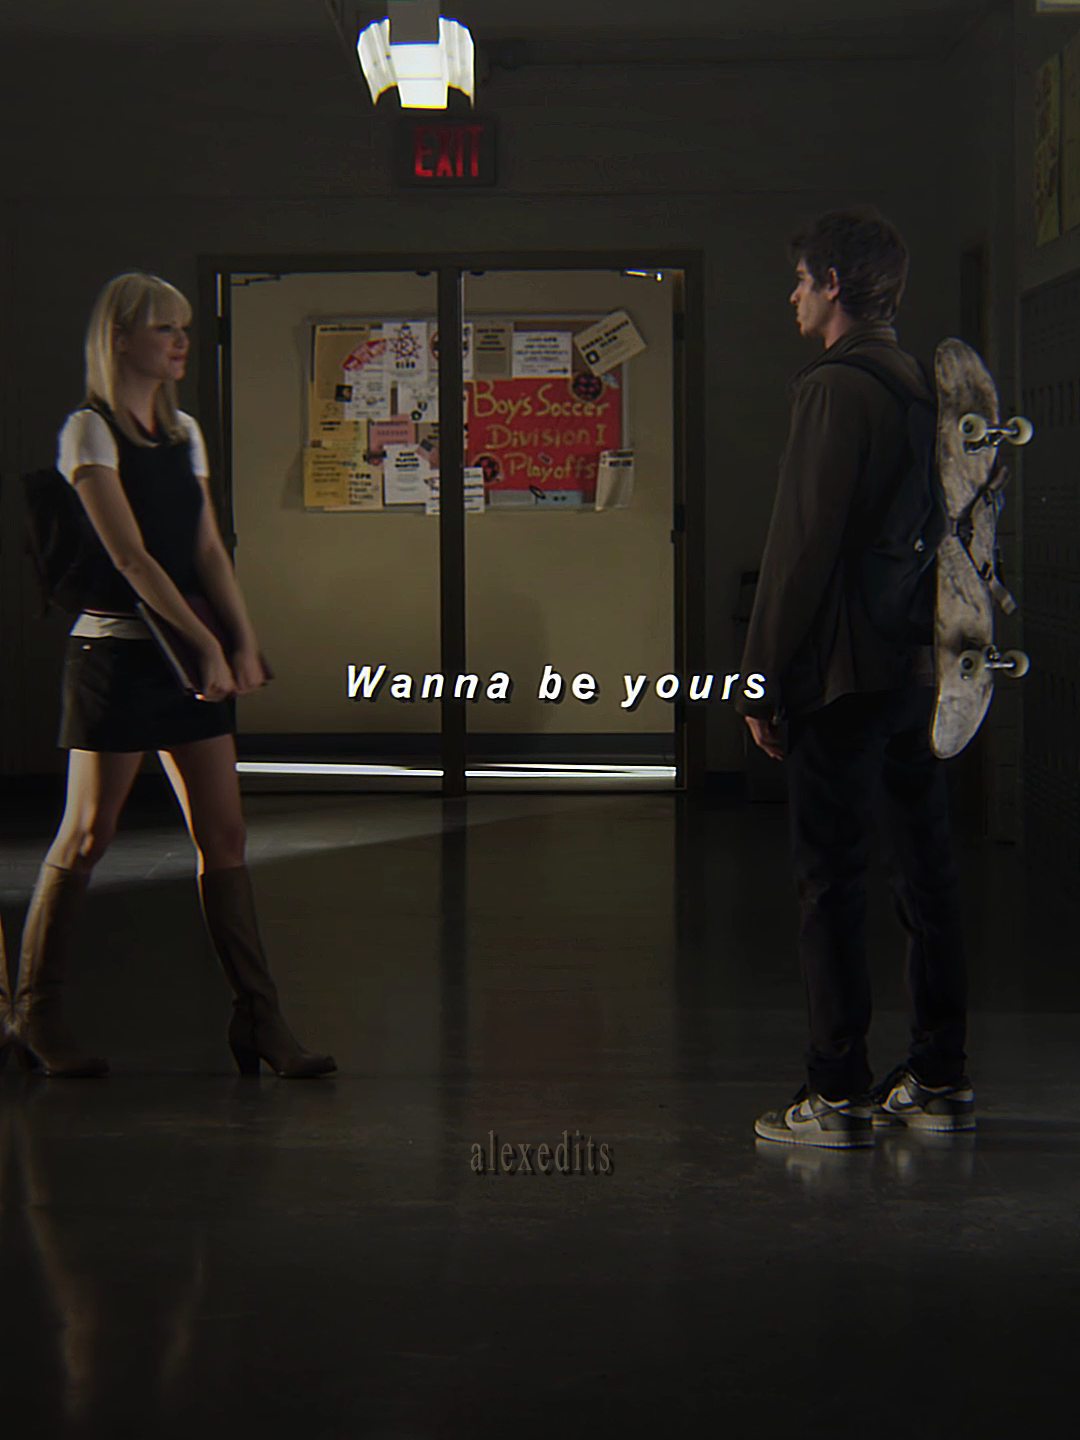 I wanna be yours  #peterparker #andrewgarfield #gwenstacy #emmastone #theamazingspiderman #edit #fyp